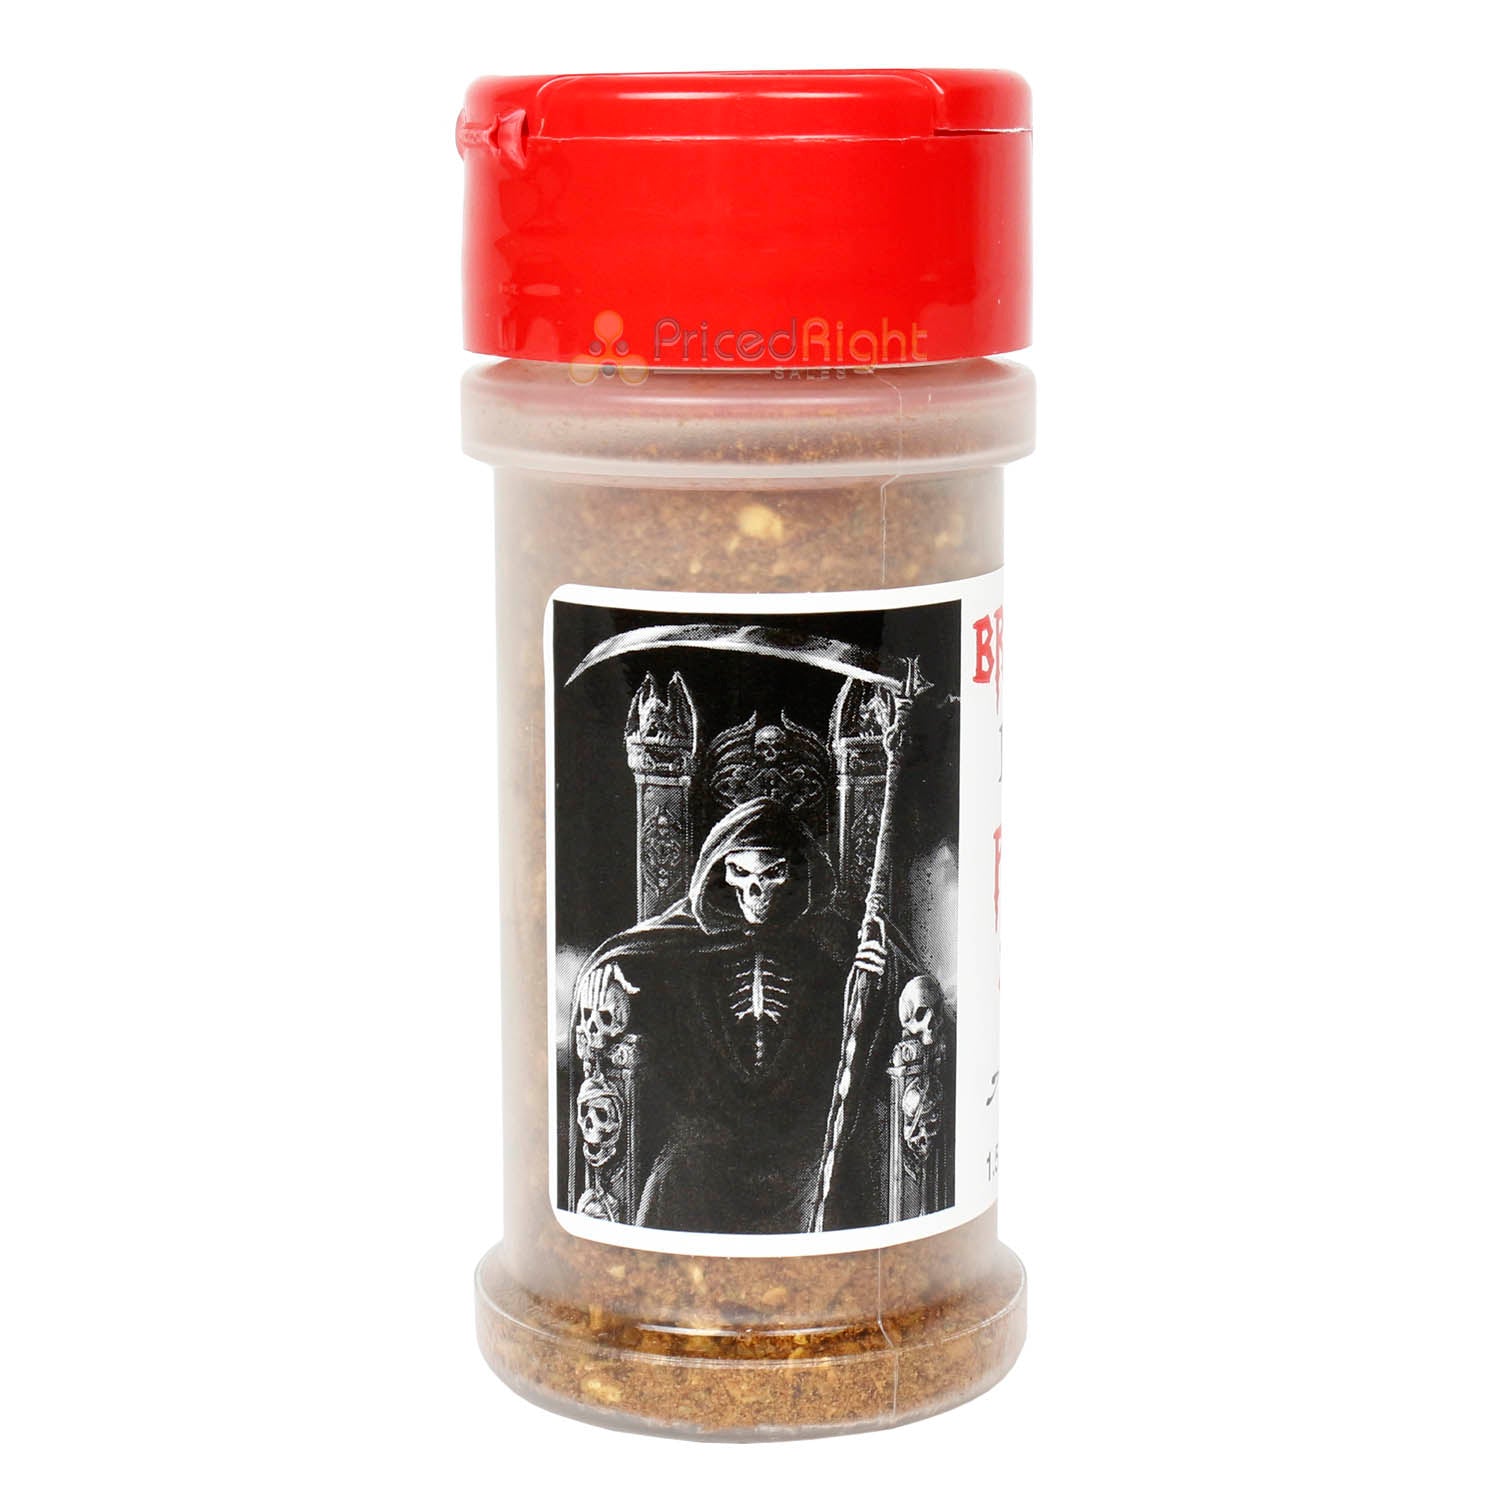 Brandl’s All Natural Death Pepper Spice Very Hot Topical Seasoning 1.5 oz